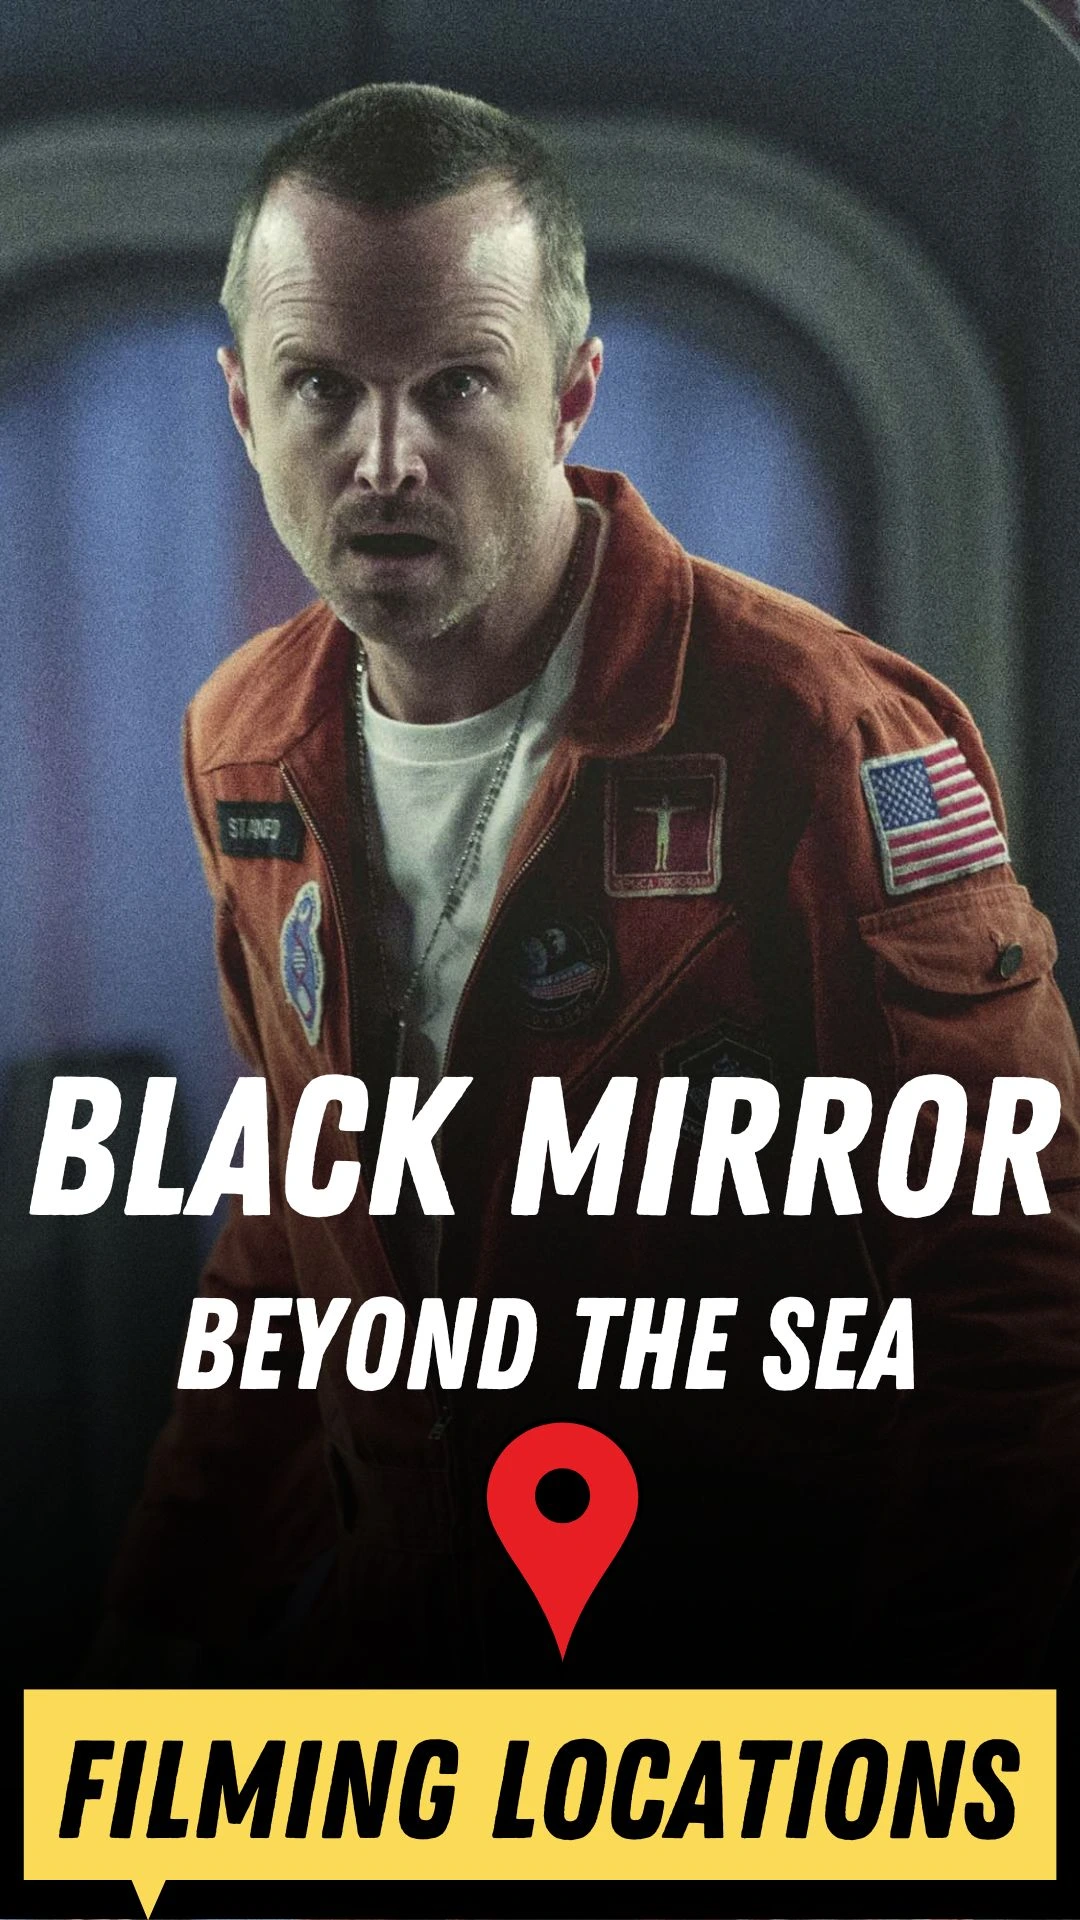 Black Mirror Beyond the Sea Filming Locations